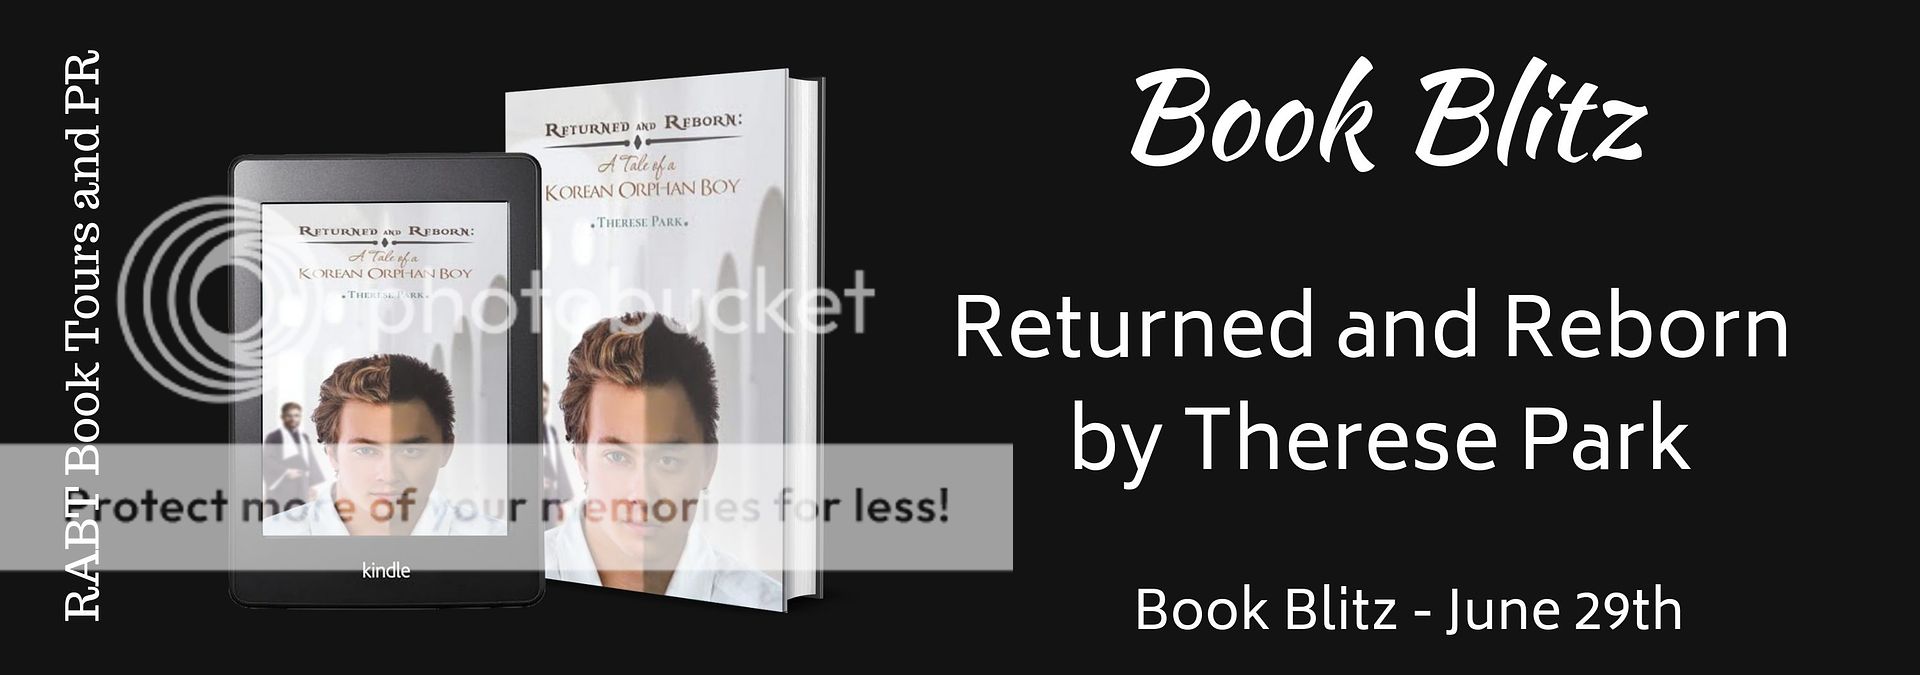 Book Blitz: Returned and Reborn by Therese Park #historicalfiction #promo @RABTBookTours